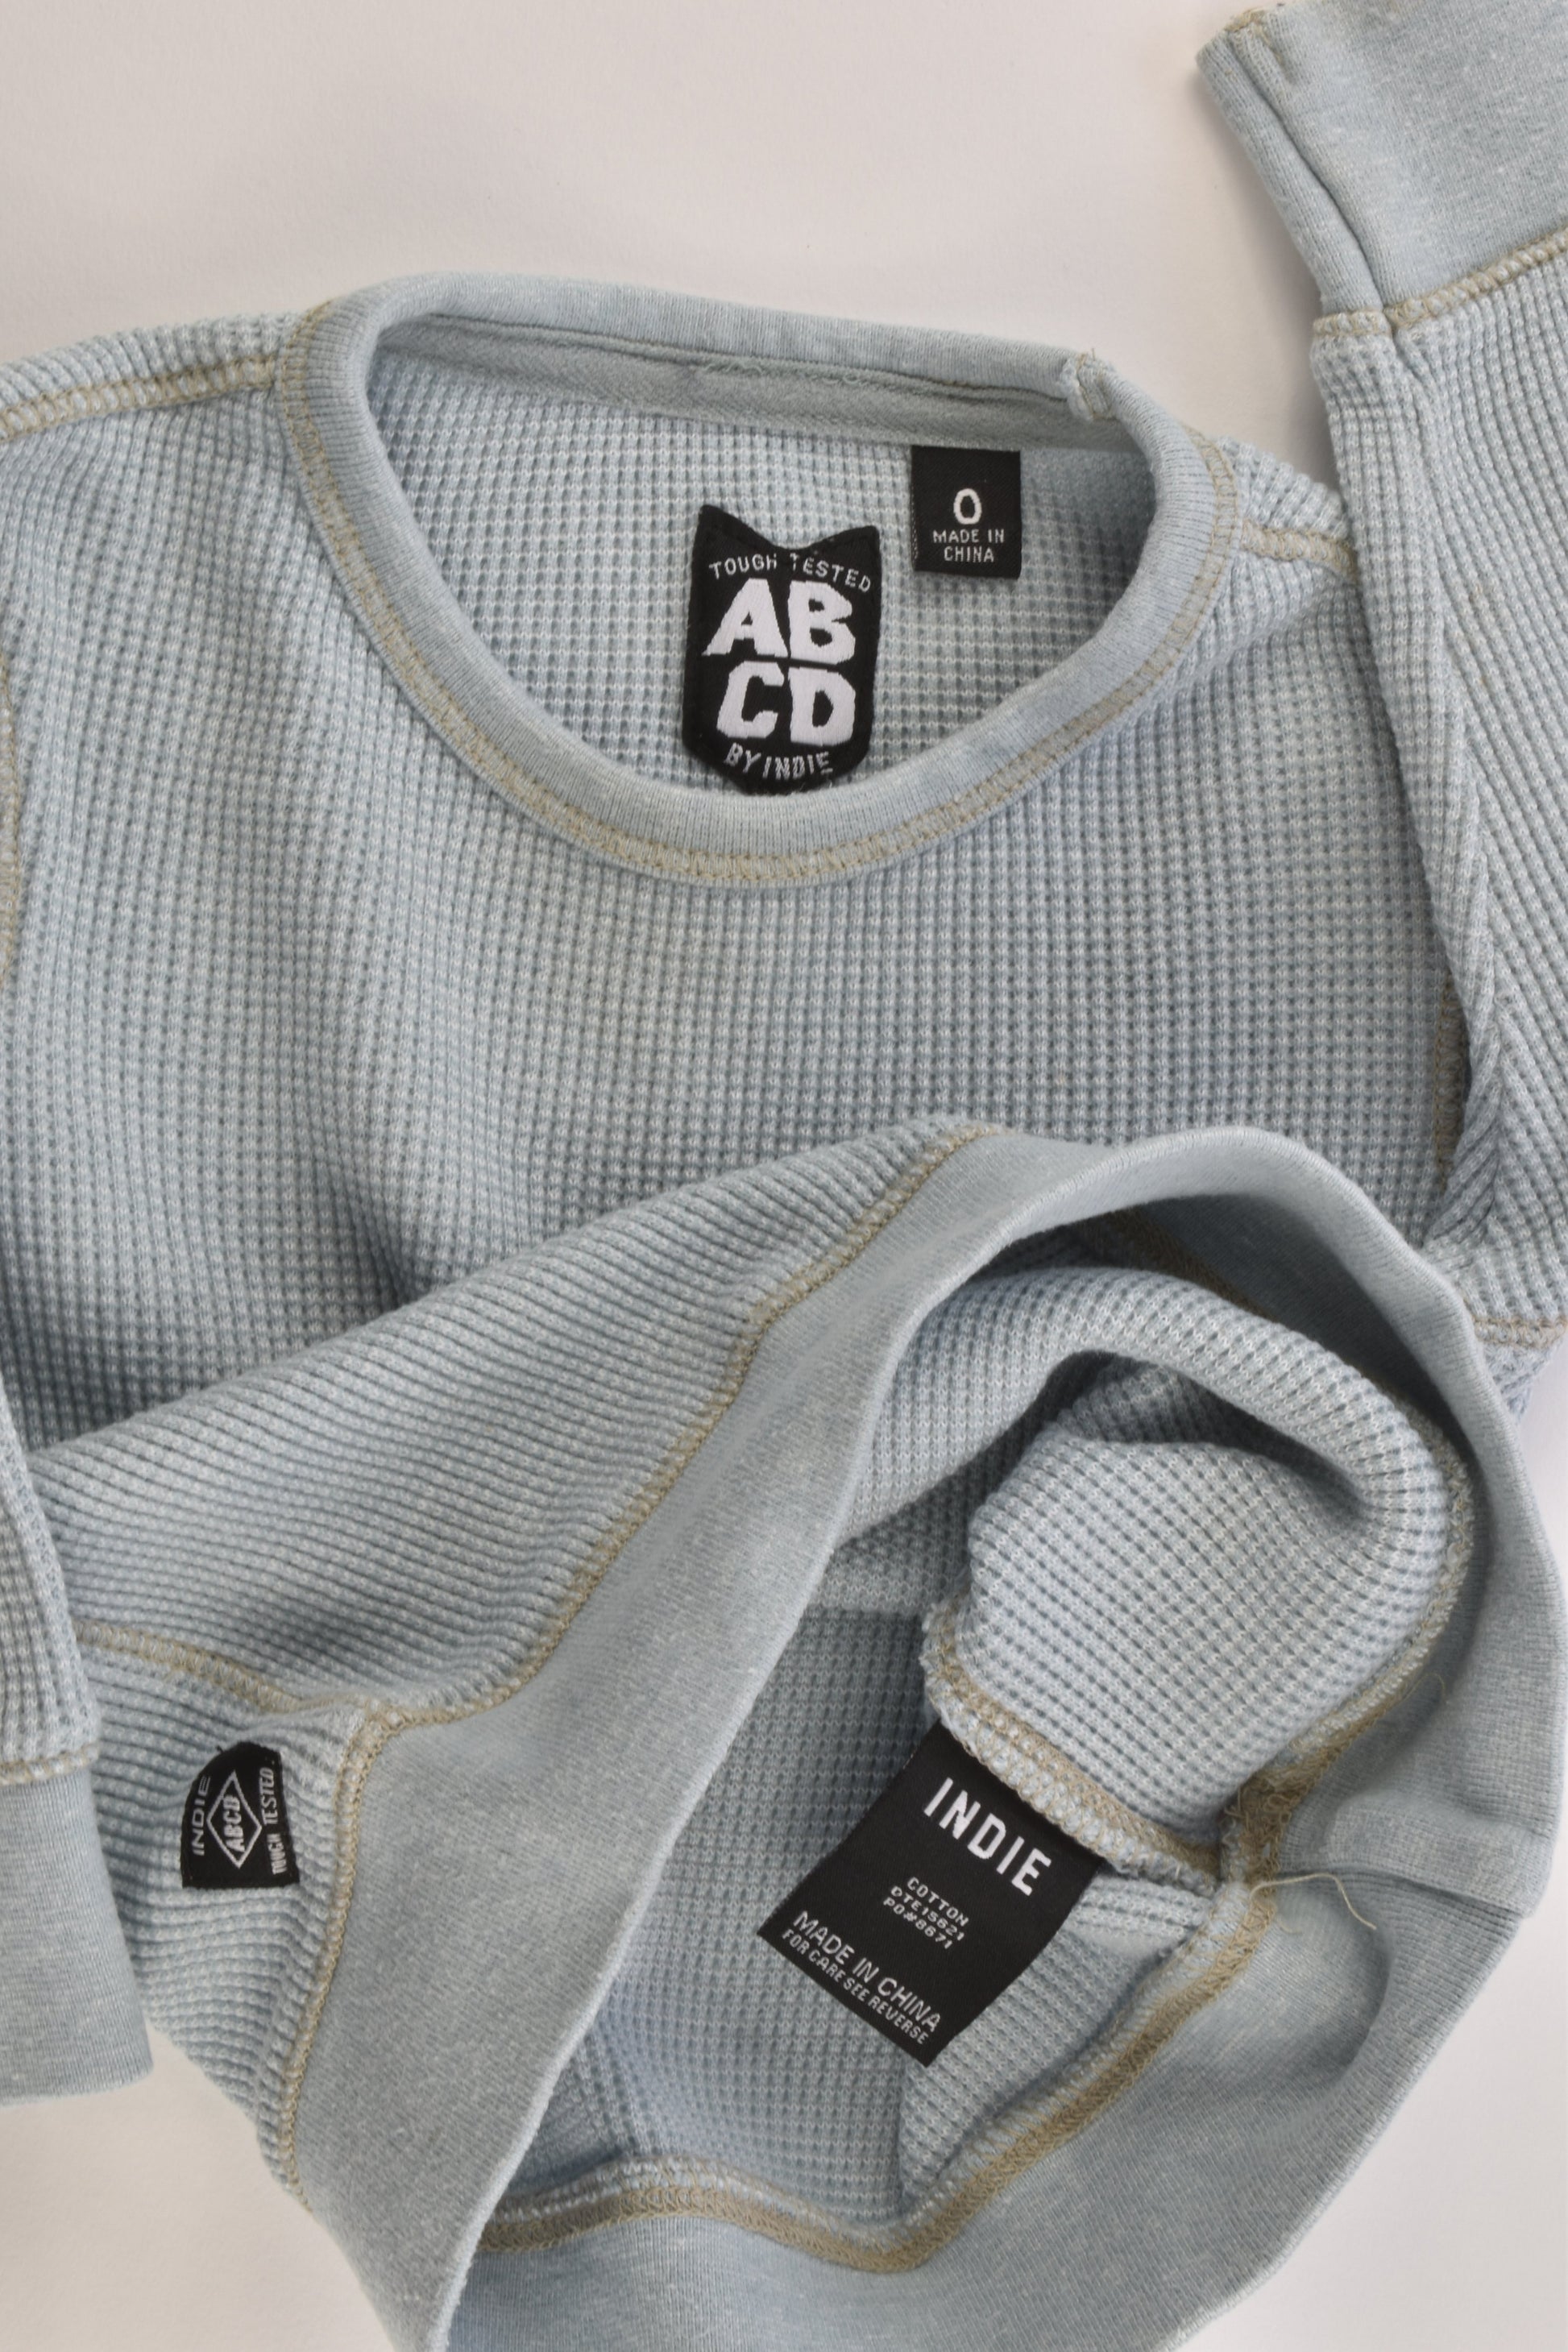 ABCD by Indie Size 0 Sweater